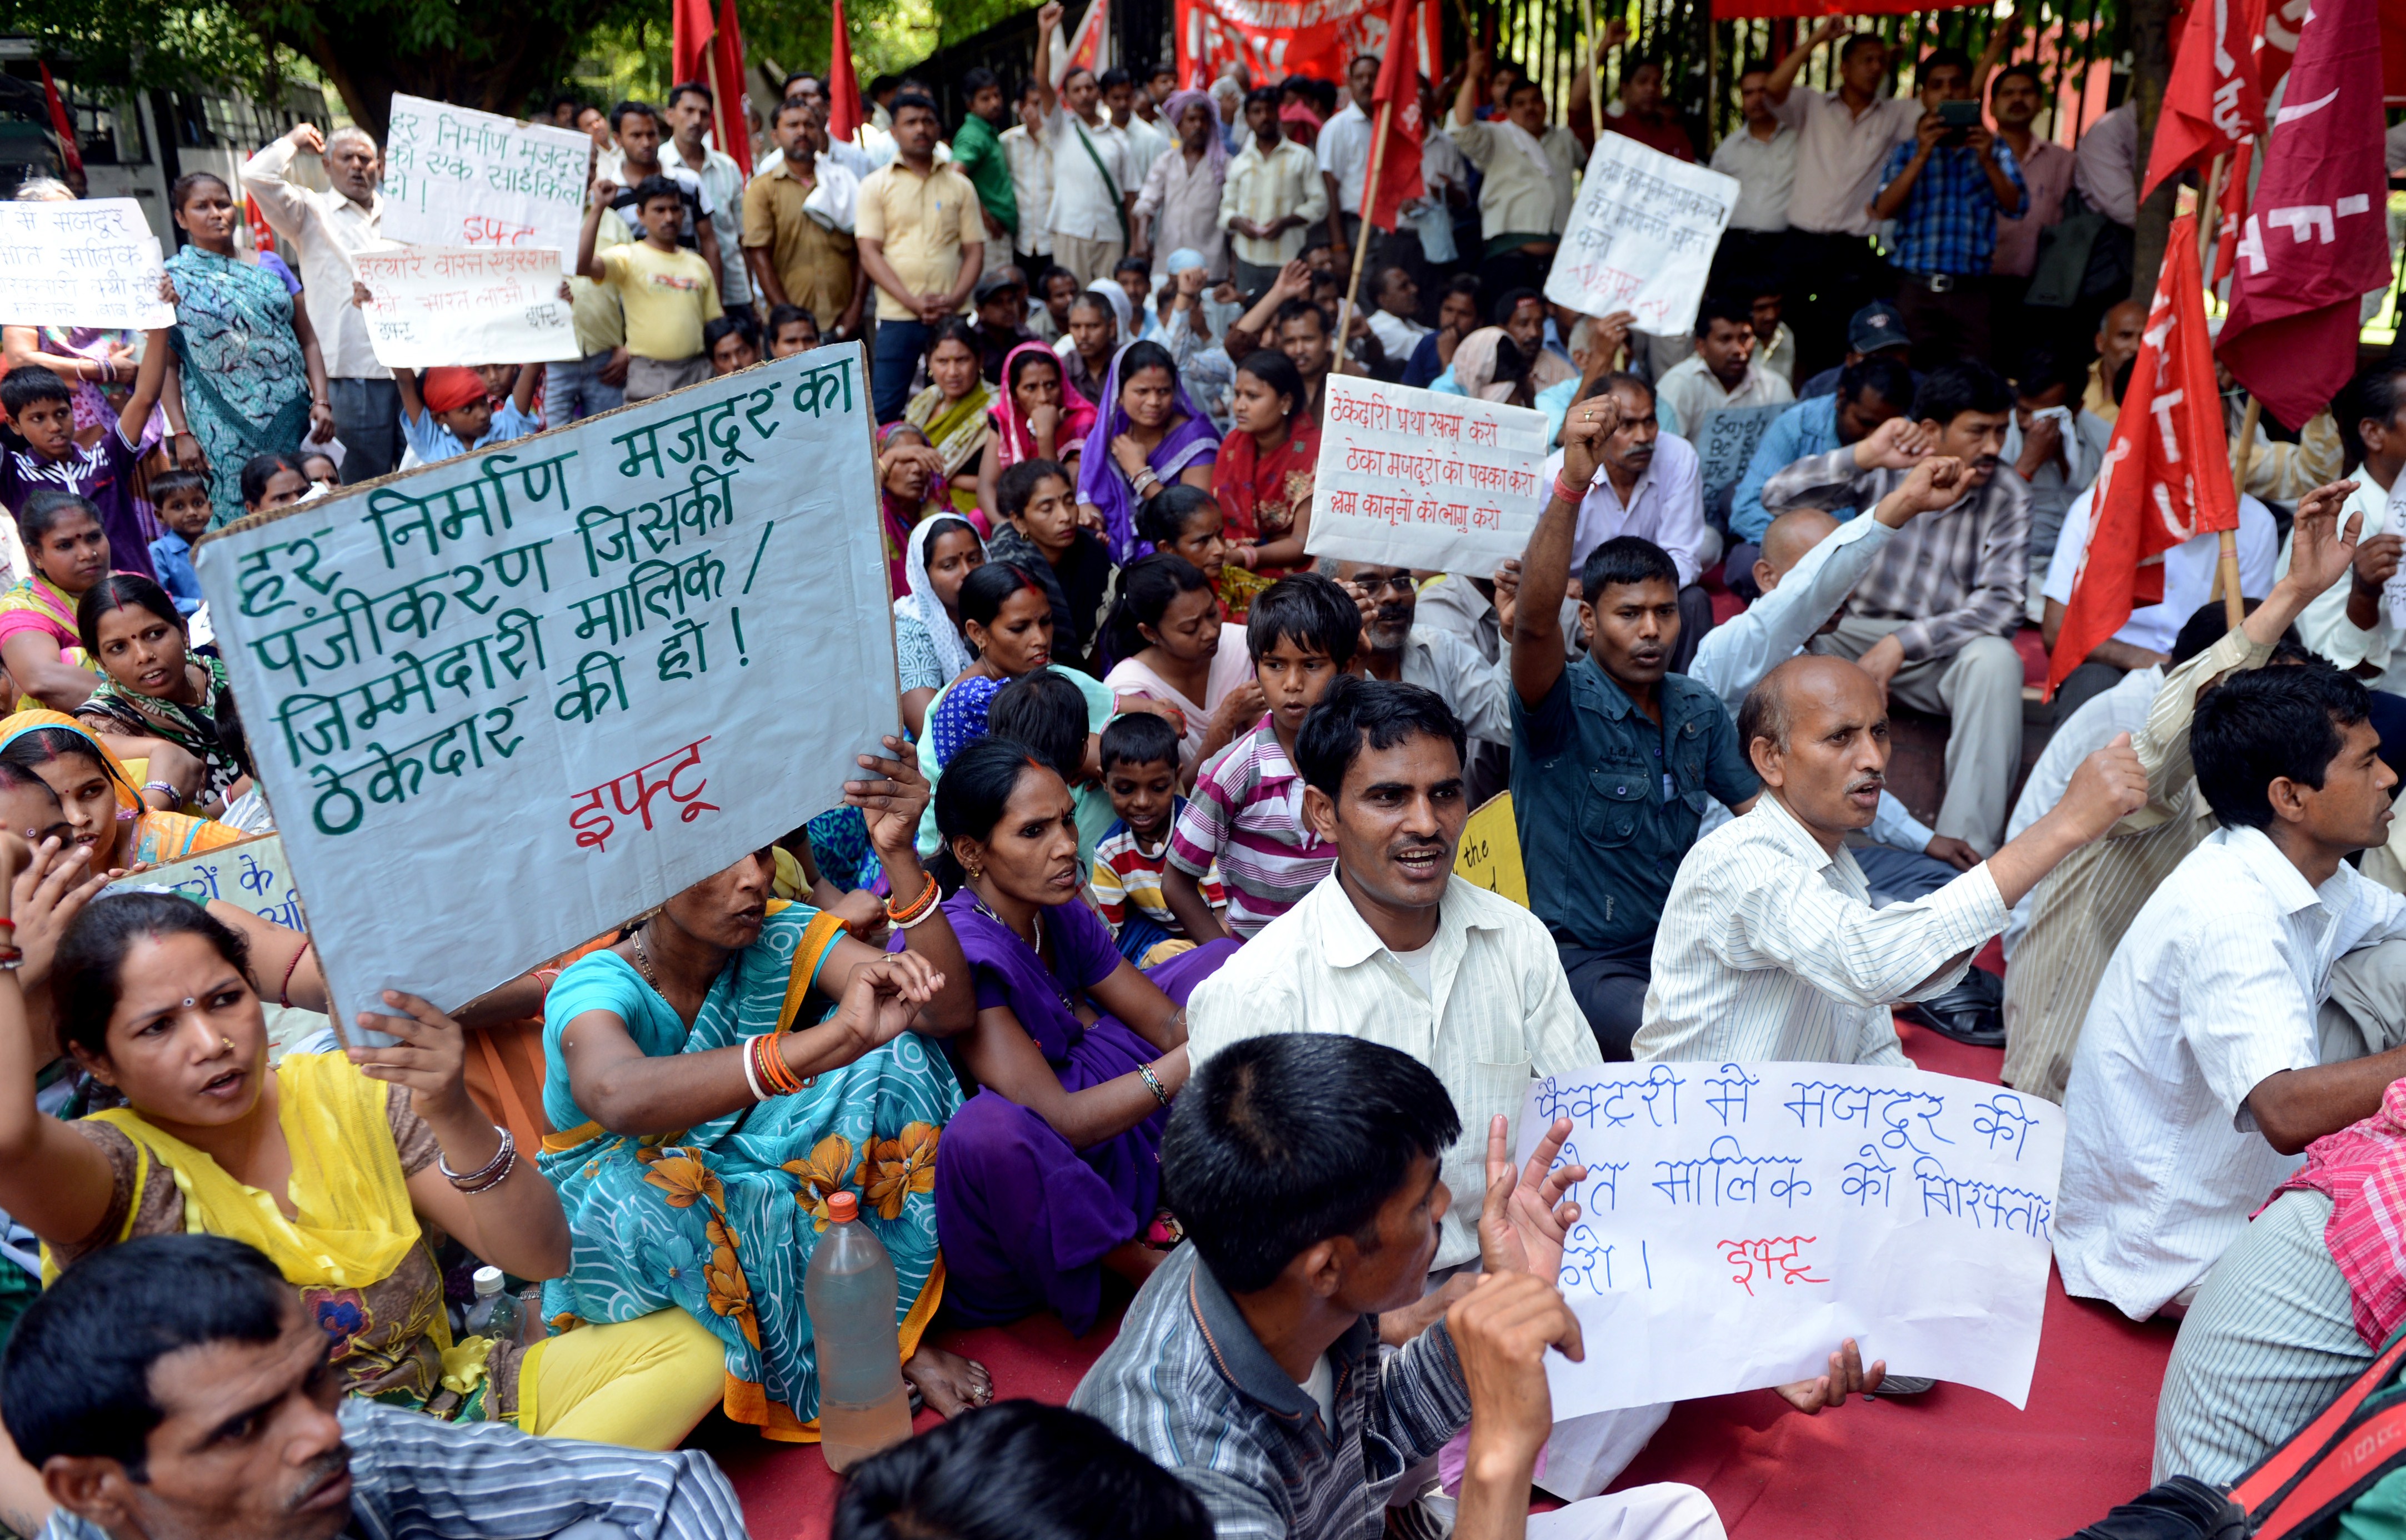 Activists from the Indian Federation of Trade Unions, Communist trade union workers and factory workers hold placards during a protest against state and central government policies that they say negatively impact workers on International Labour Day in New Delhi on May 1, 2014.  (Getty)